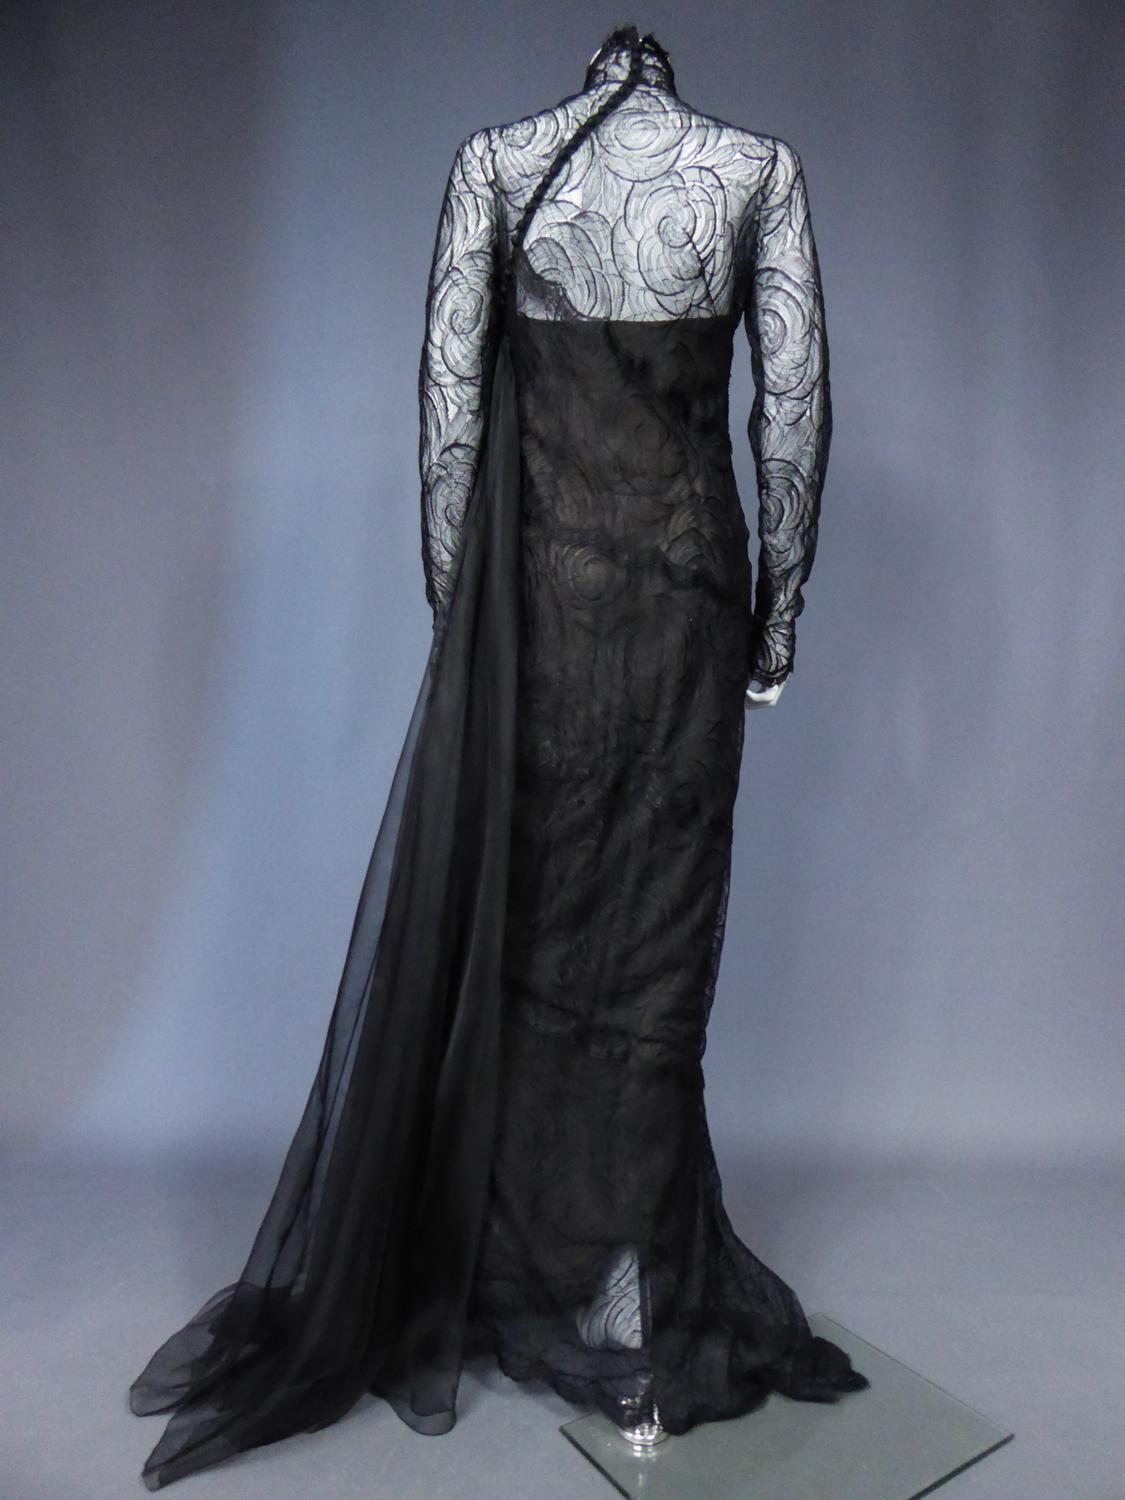 A Chanel Haute Couture Evening Dress by Karl Lagerfeld in Calais Lace Circa 1997 8